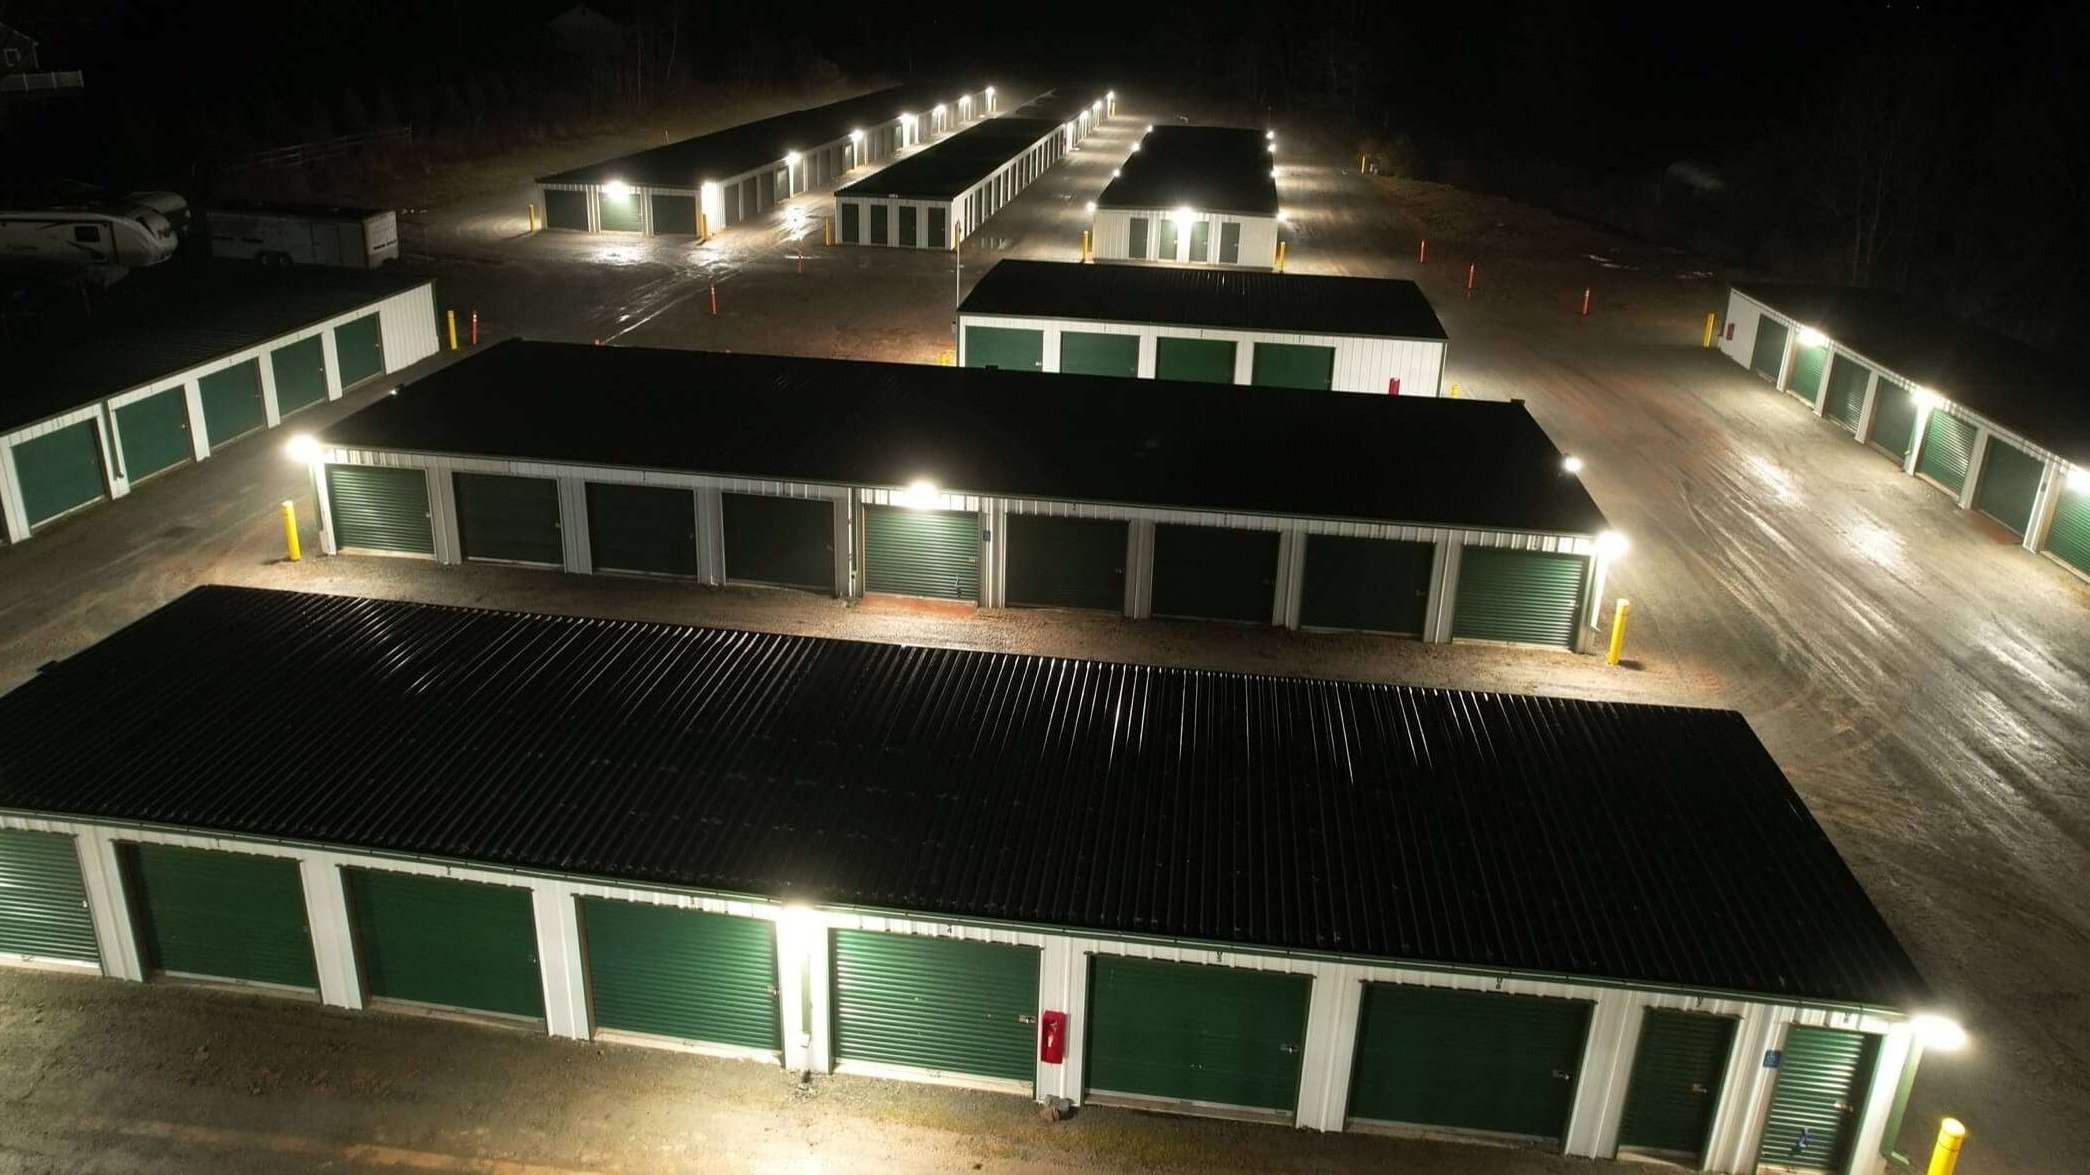 Get Secure Storage In Monticello, NY With 24-Hour Surveillance & Gated Entry